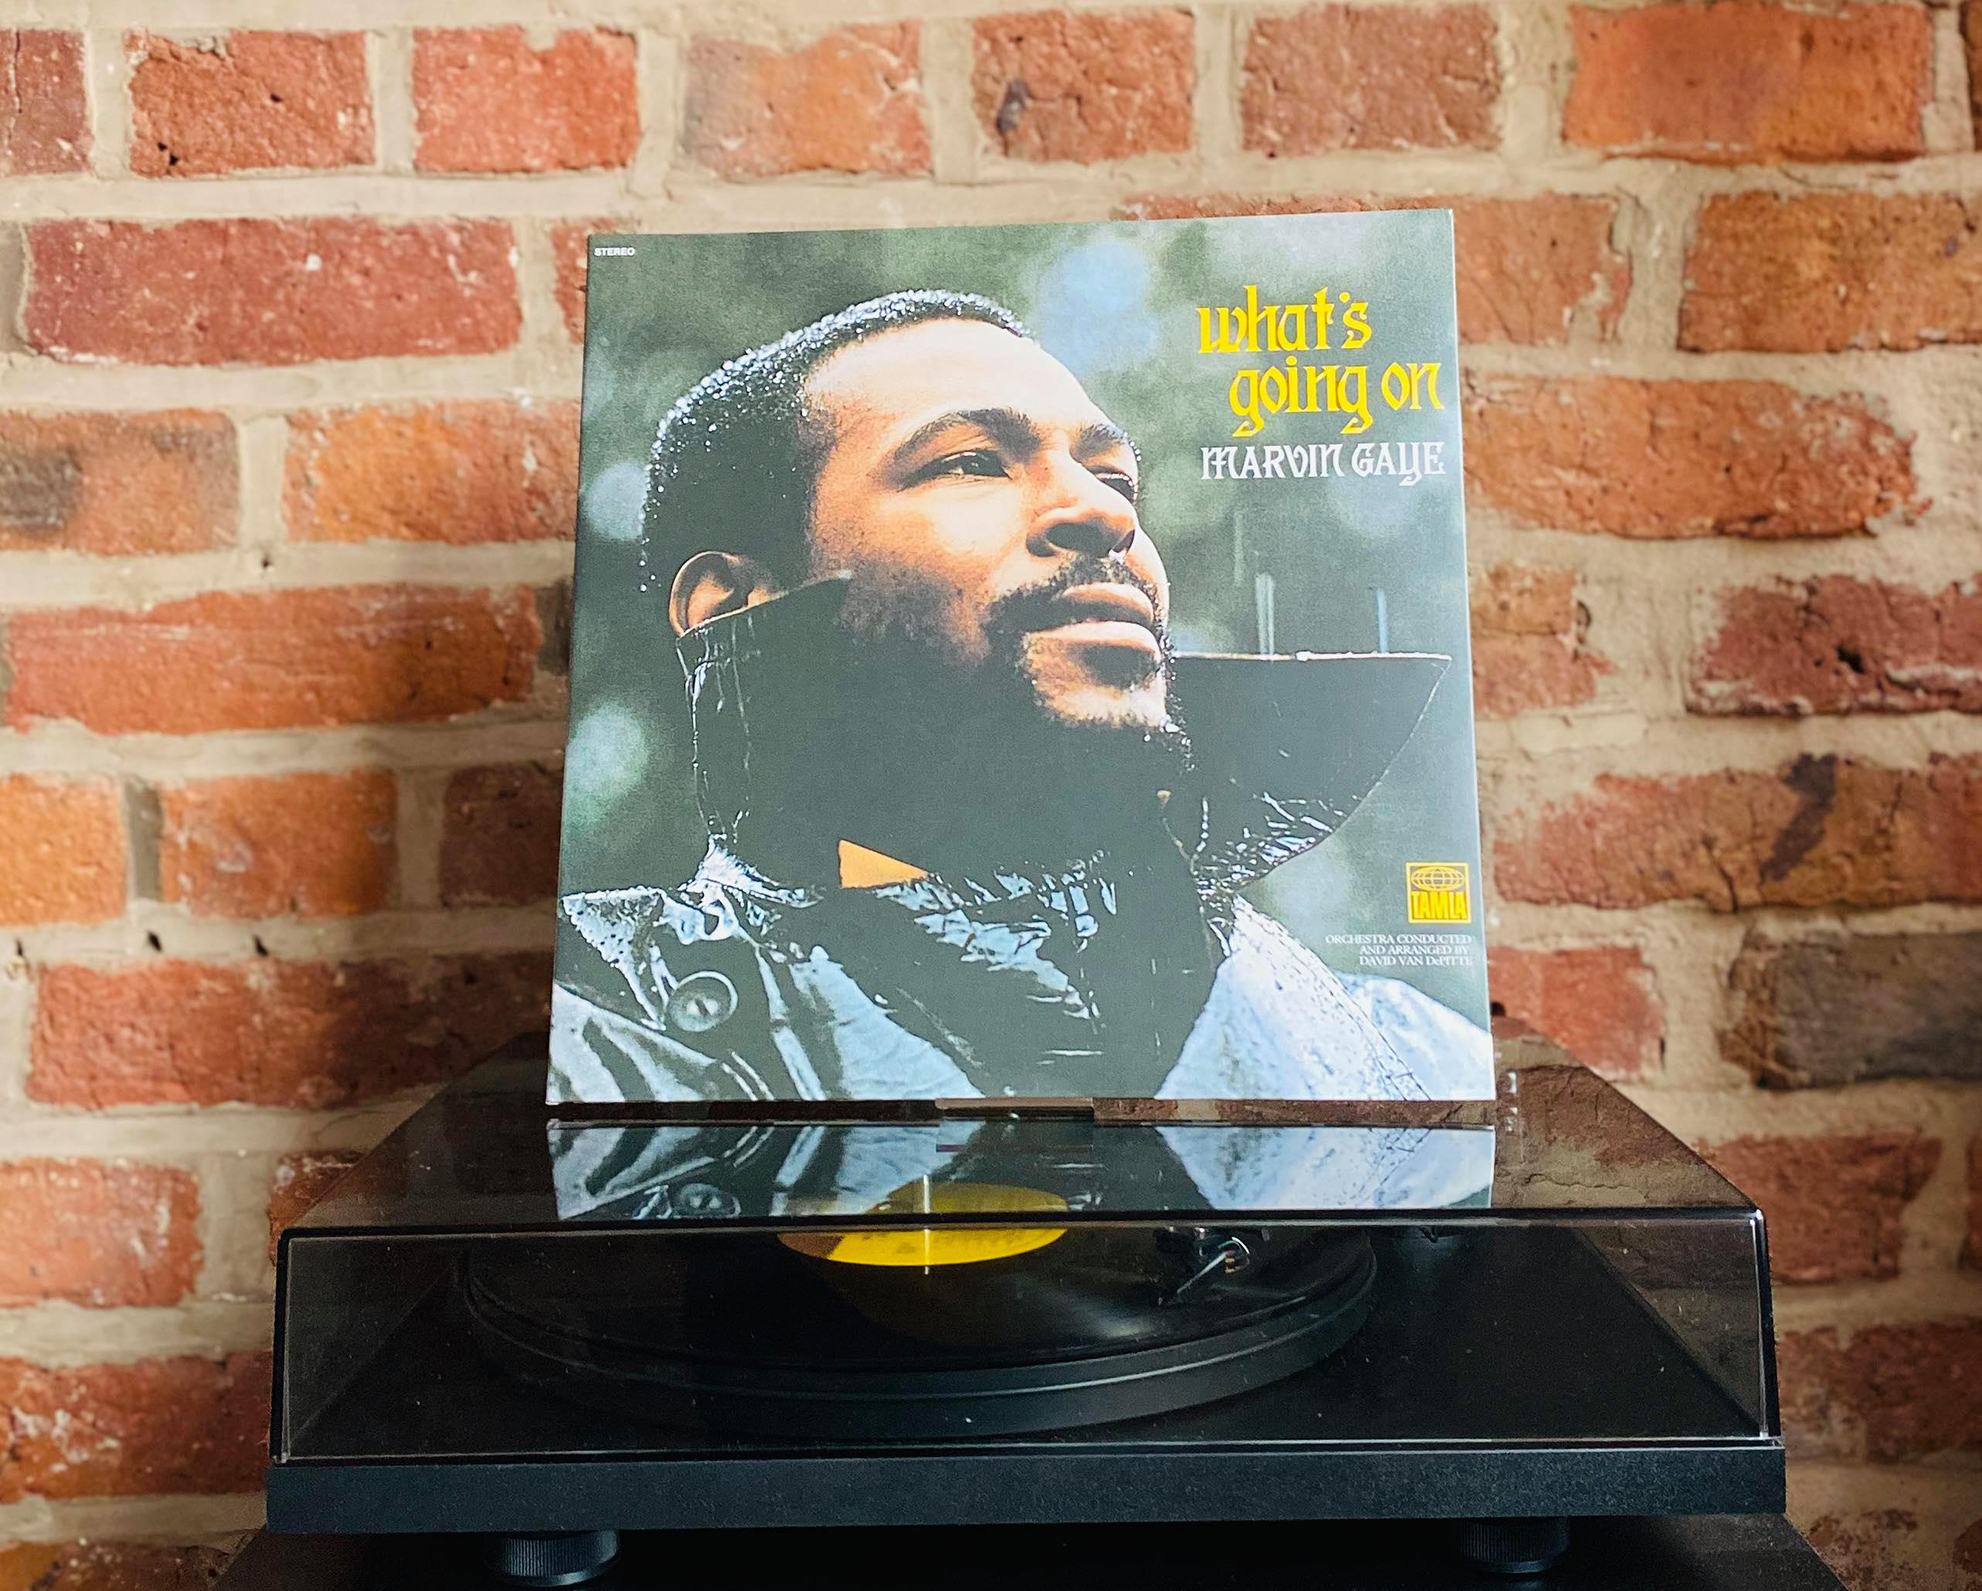 ON THE TURNTABLE: Marvin Gaye - What’s Going On 